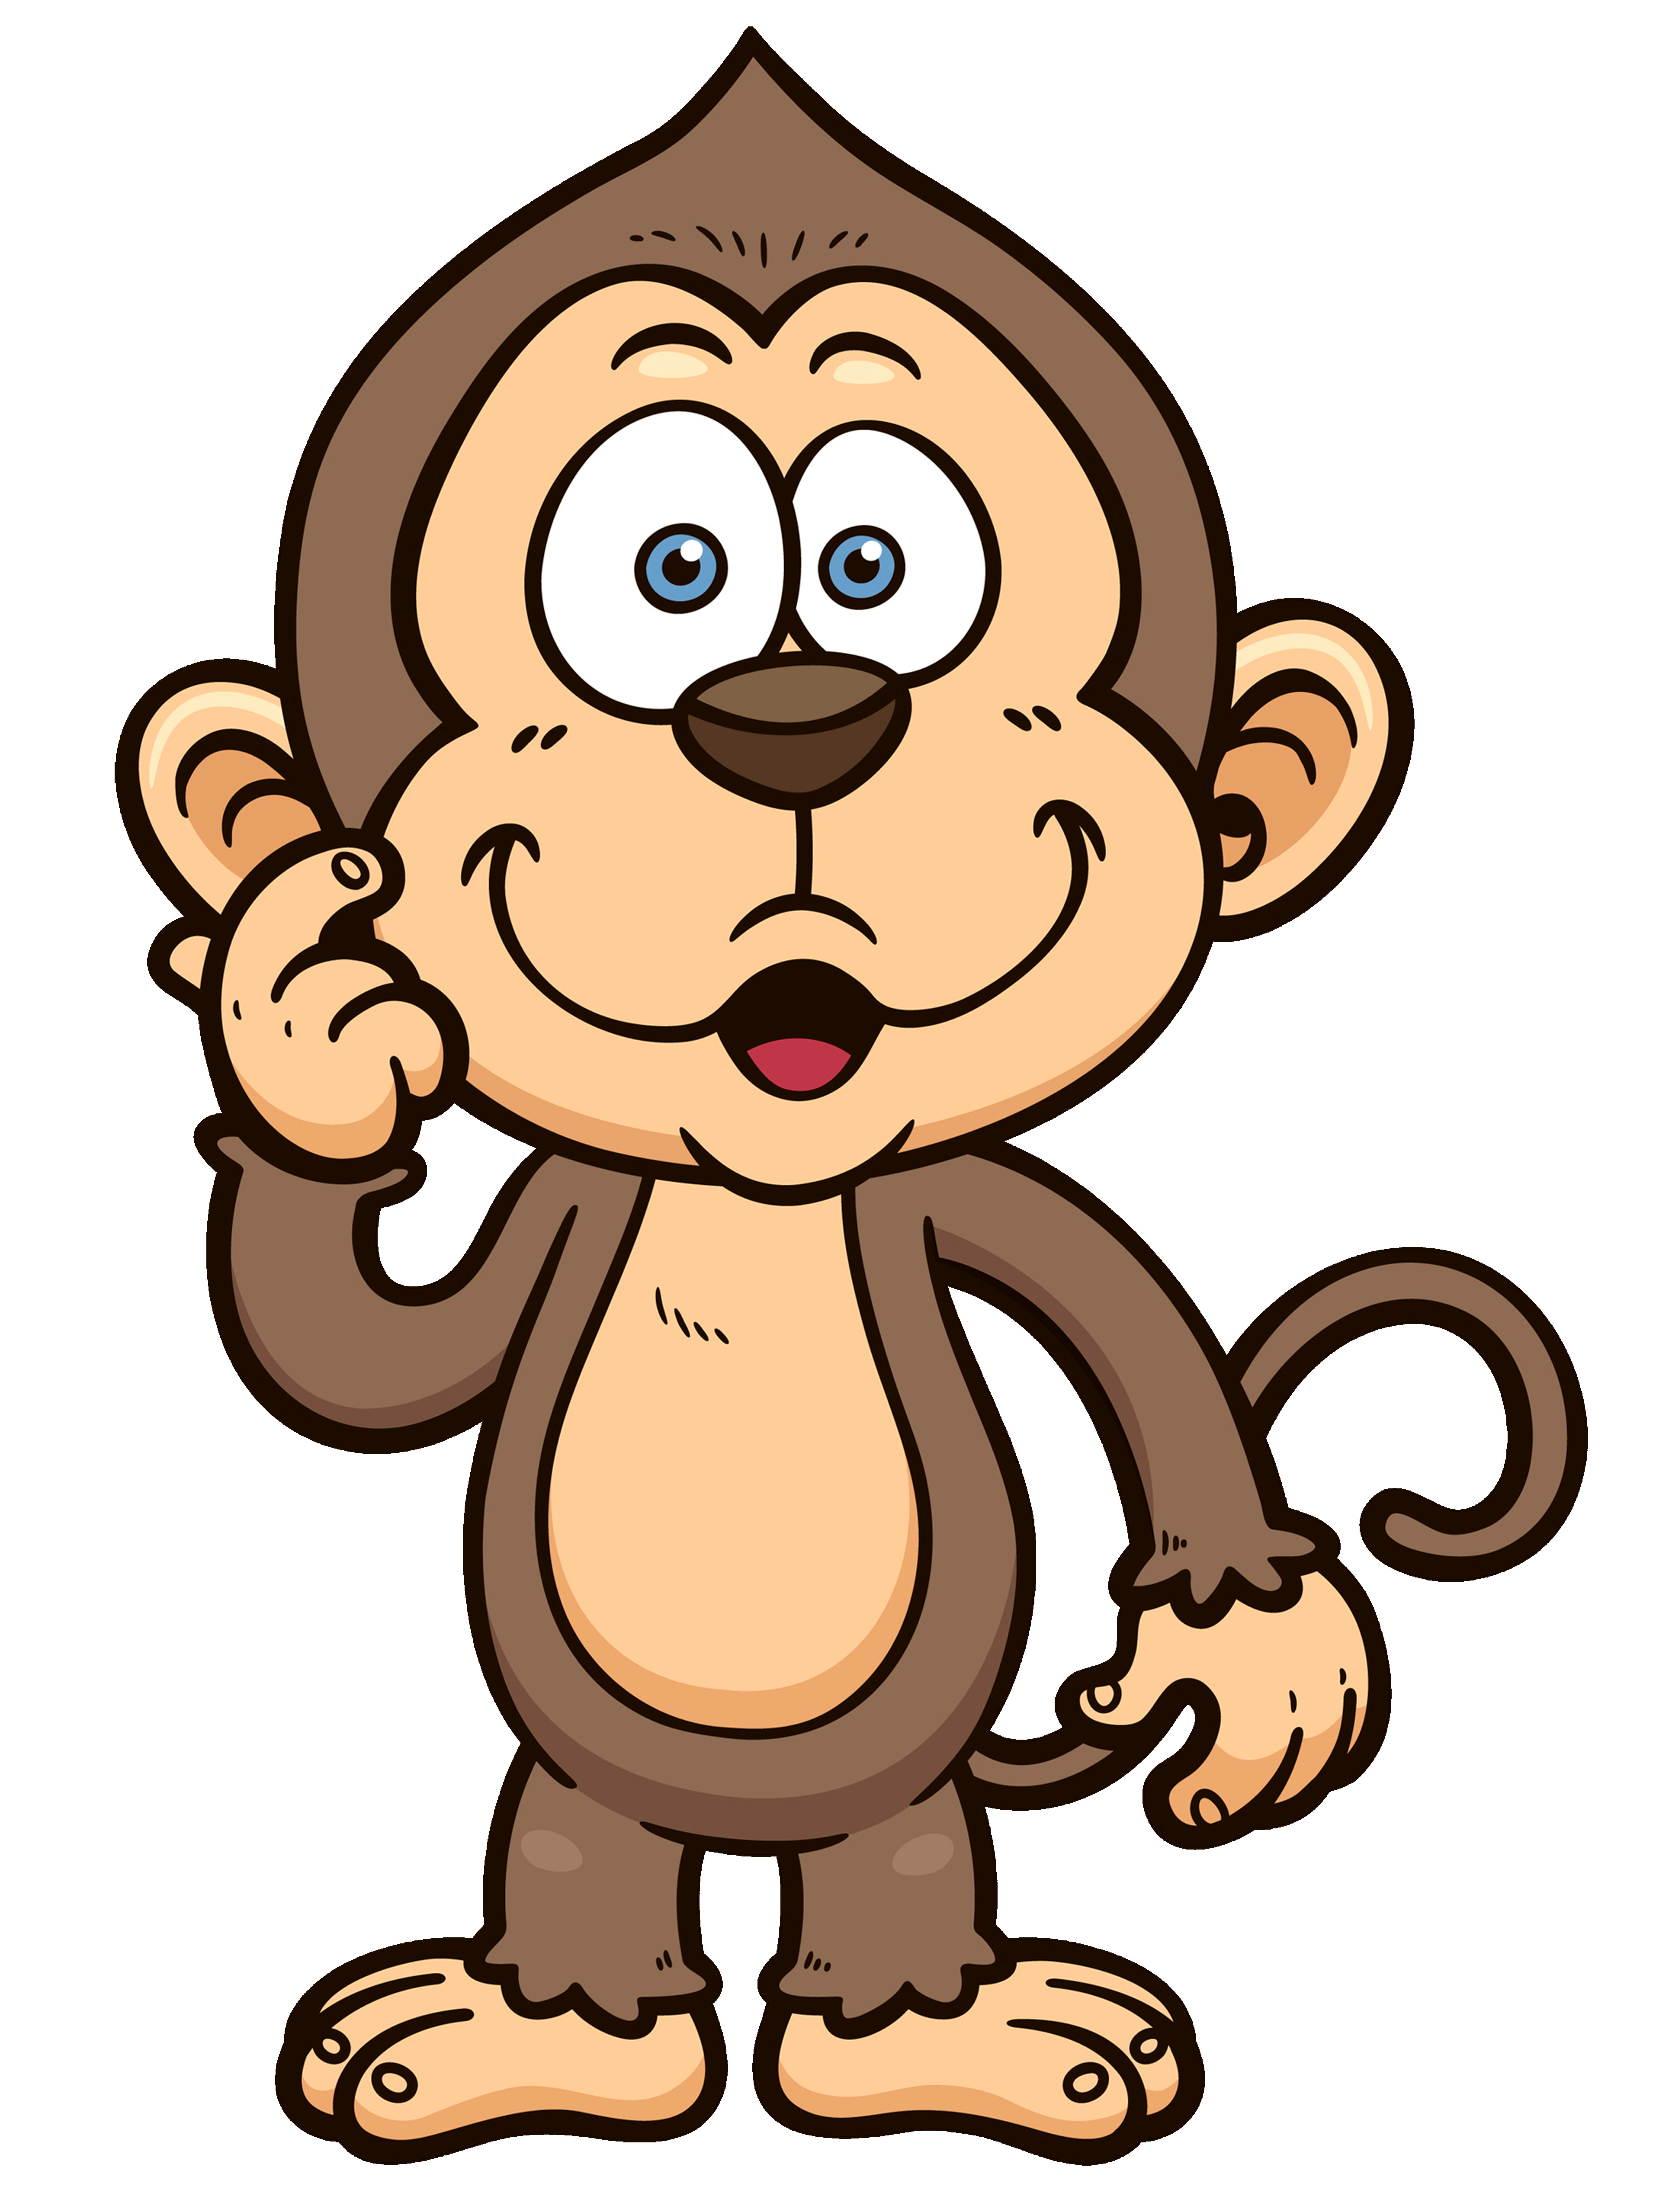 Monkey Cartoon PNG Clipart Image Gallery Yopriceville High Adorable ...